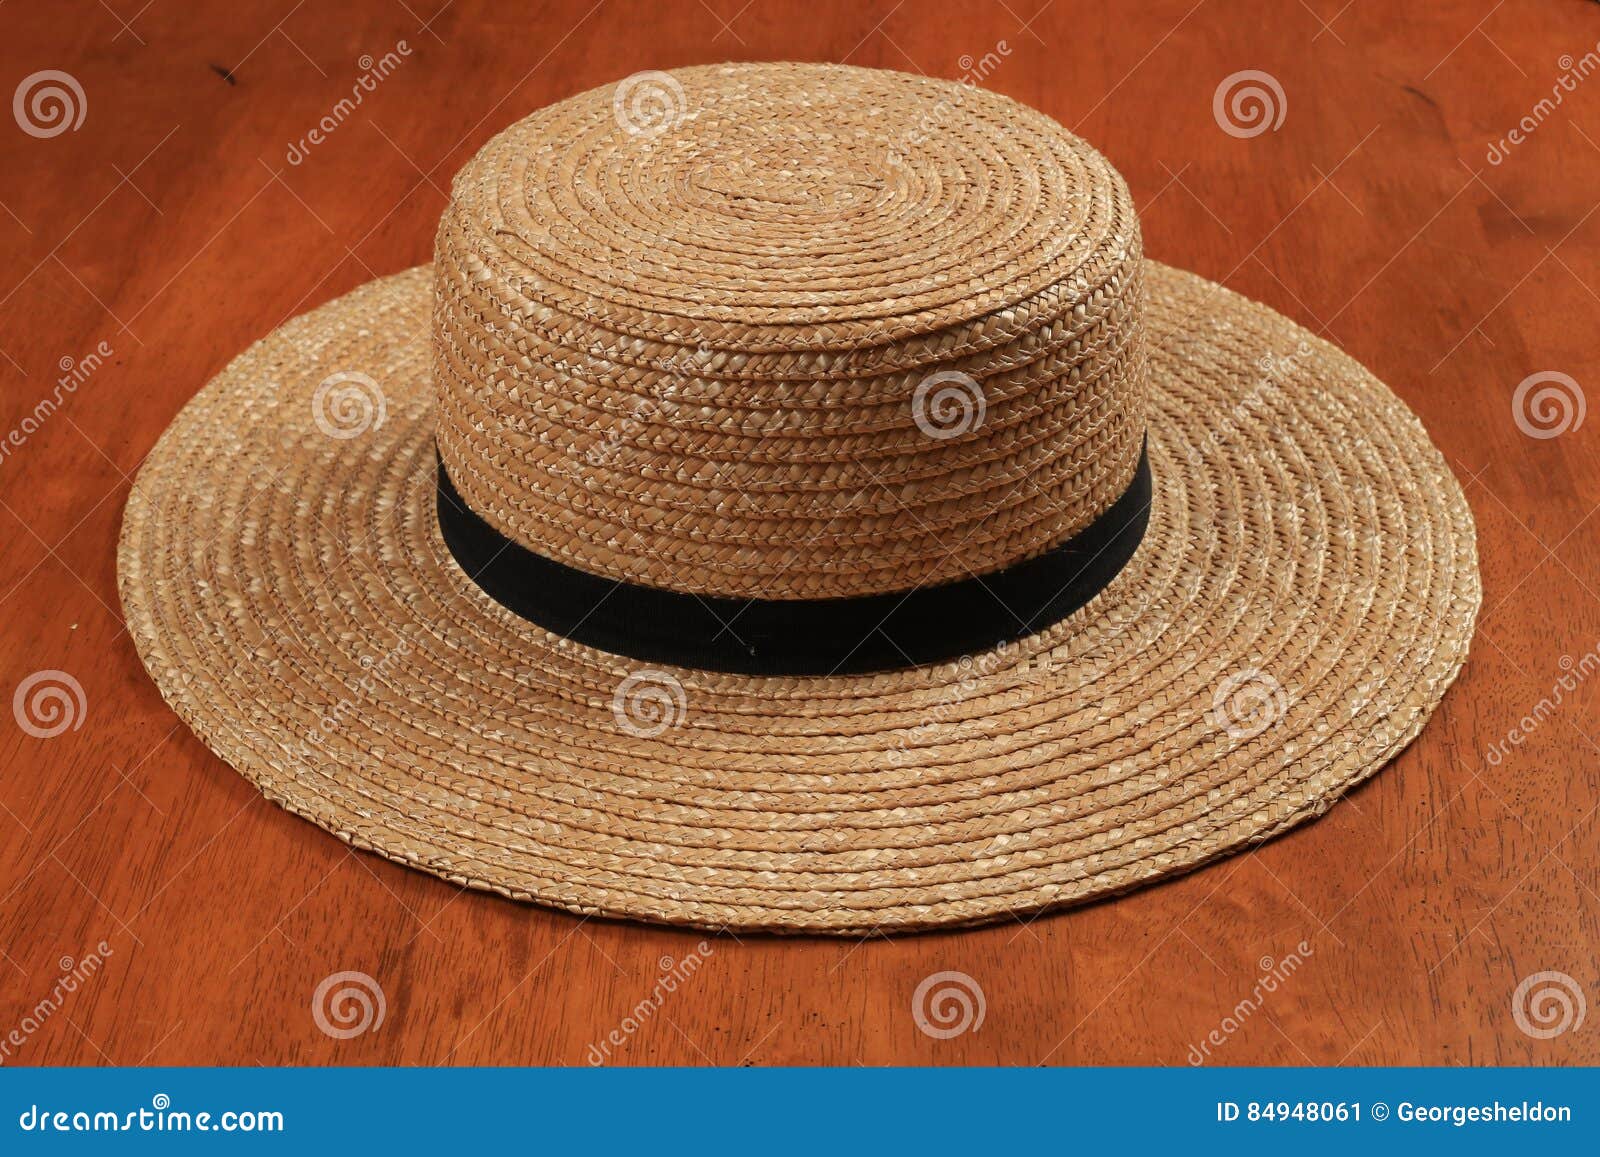 Straw Hat stock image. Image of summer, american, rural - 84948061